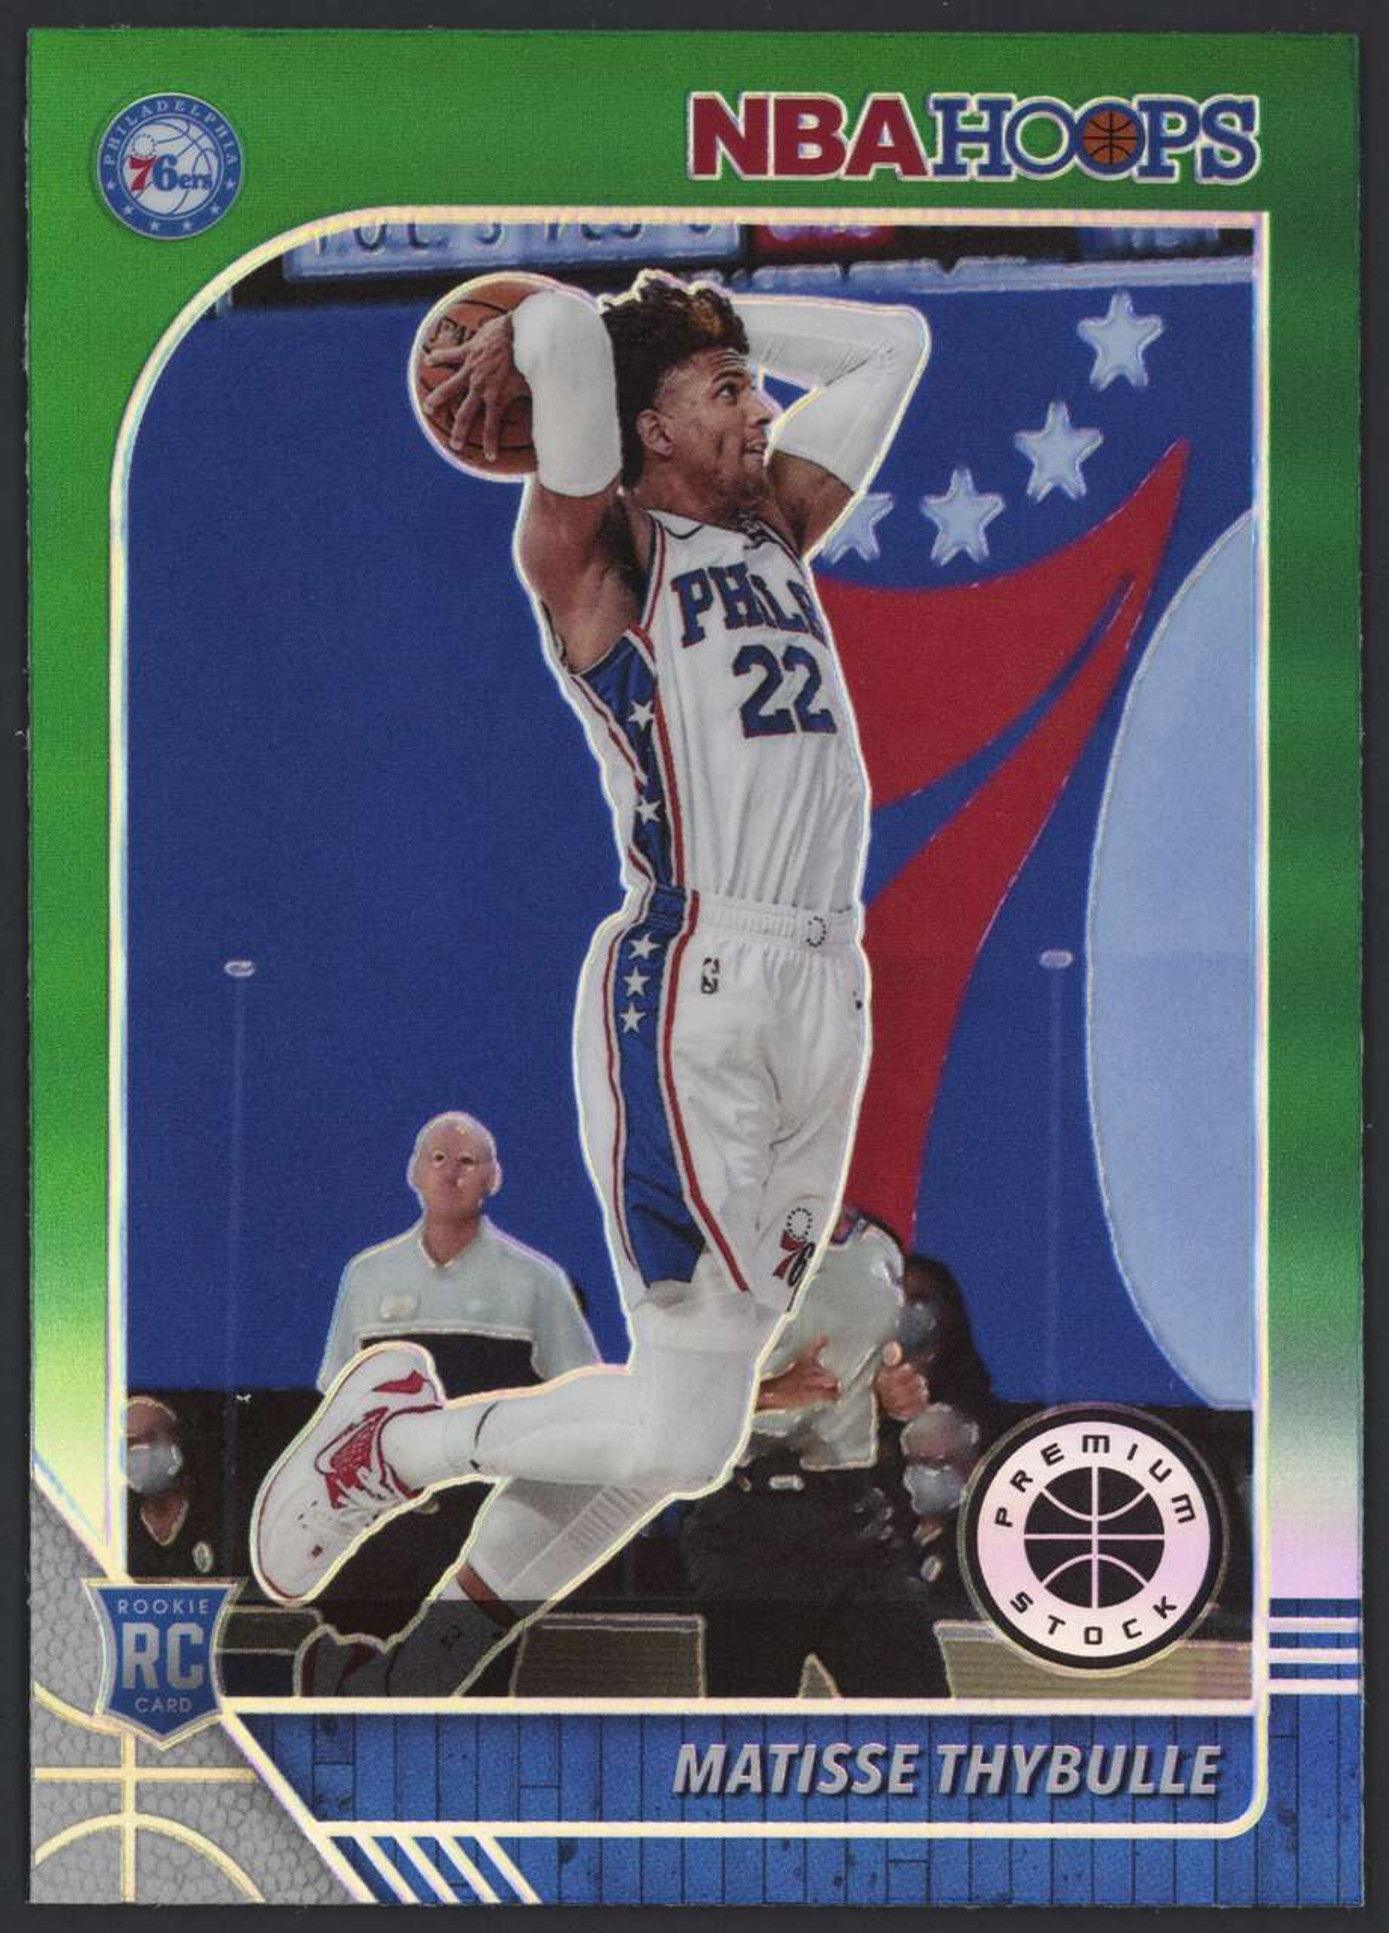 2019 Panini Hoops Premium Stock #239 Matisse Thybulle Green EX 76ers Rookie RC